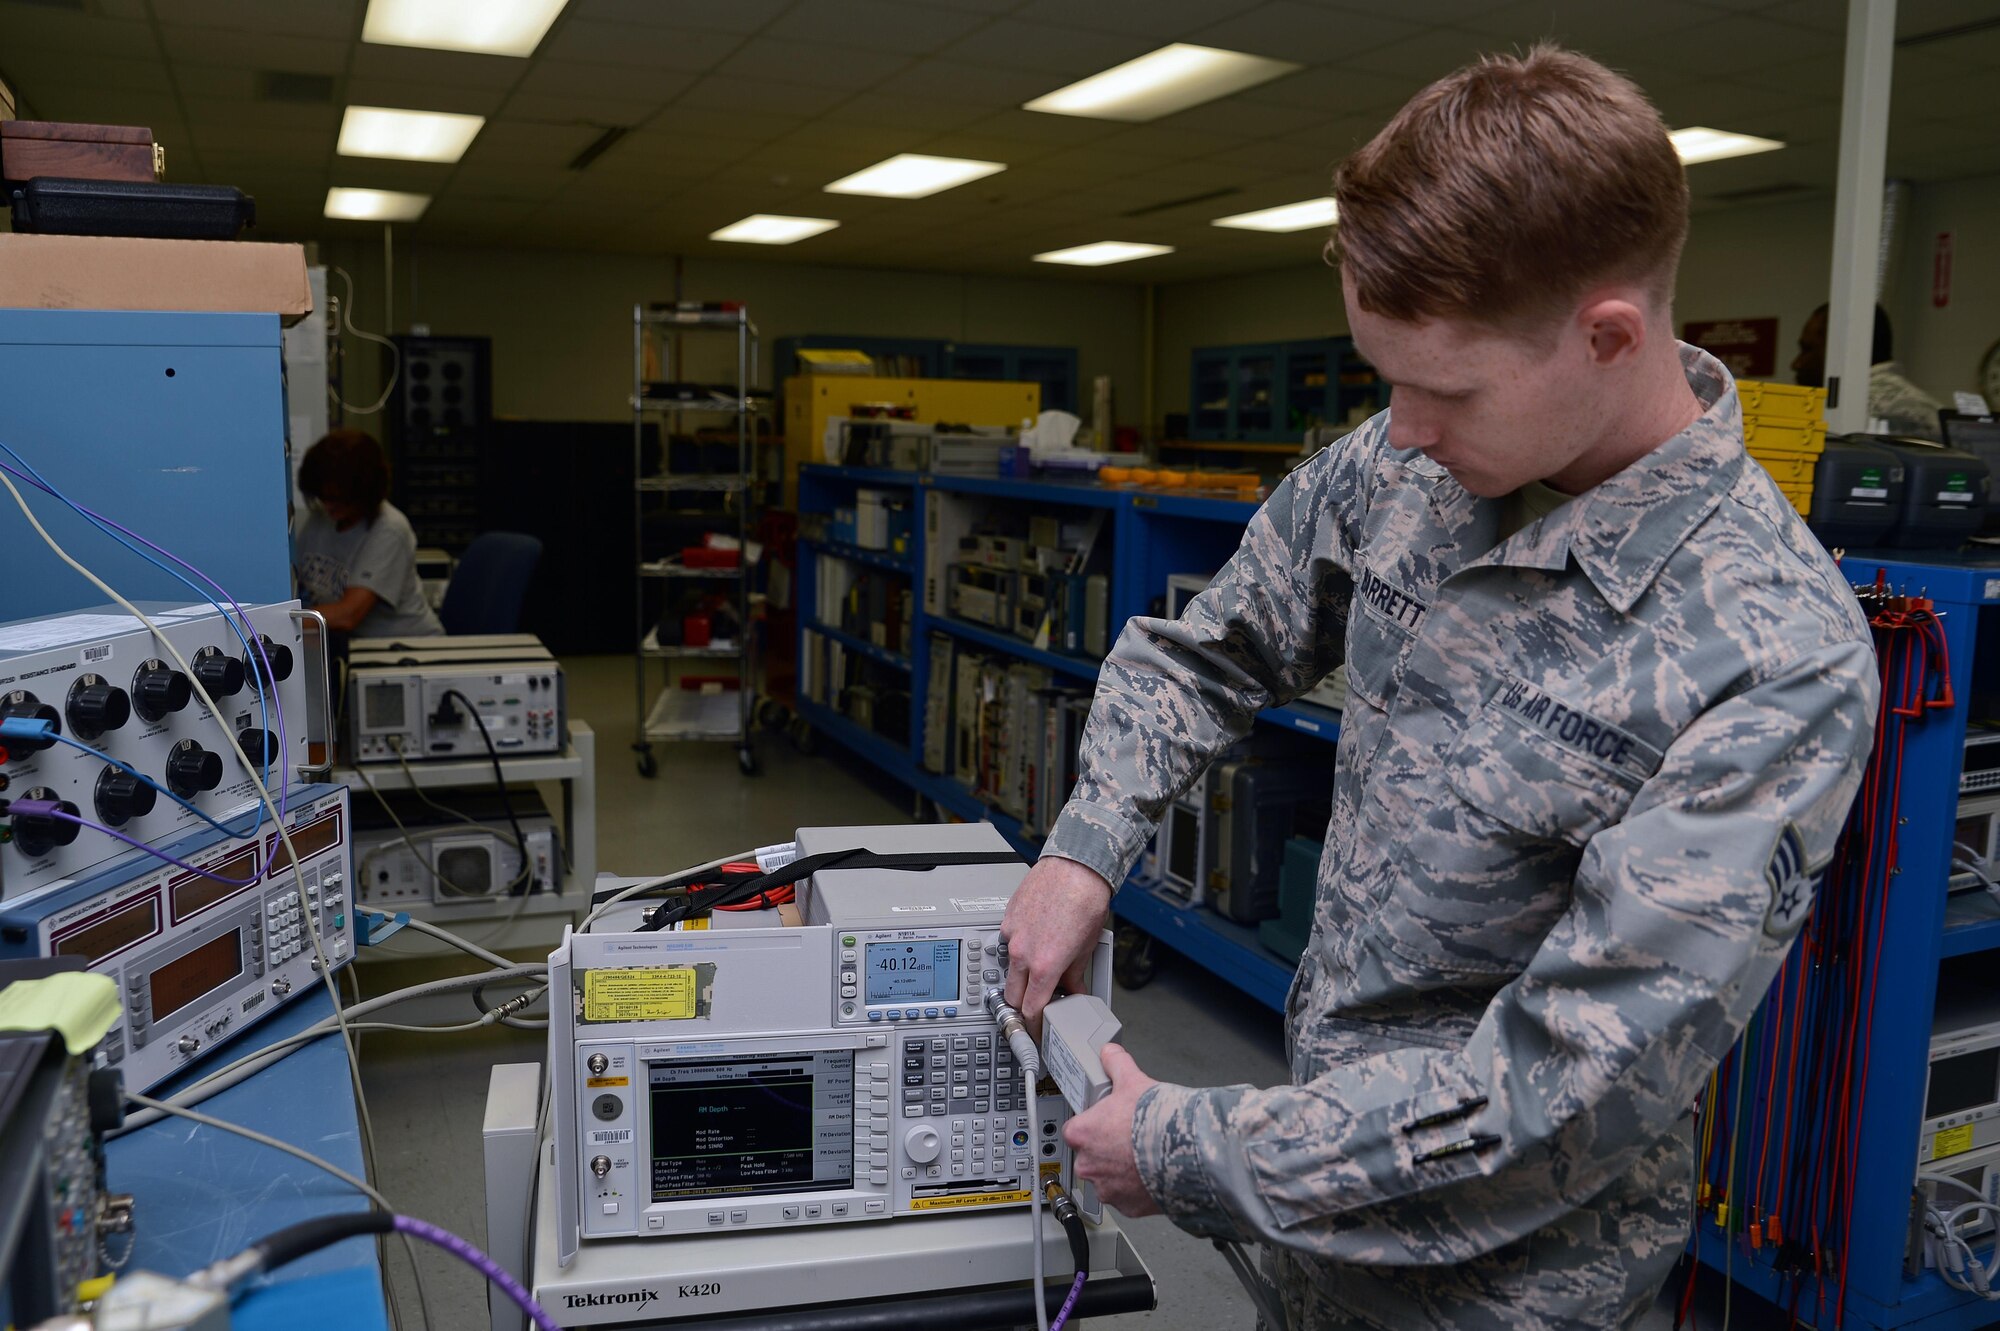 Senior Airman Christopher Barrett, 62nd Maintenance Squadron precision measurement equipment laboratory technician, calibrates a piece of radio equipment using an automation process June 7, 2016 at Joint Base Lewis-McChord, Wash. The PMEL shop has been able to automate equipment through working with manufacturers to develop automation processes. (U.S. Air Force photo/Senior Airman Jacob Jimenez) 